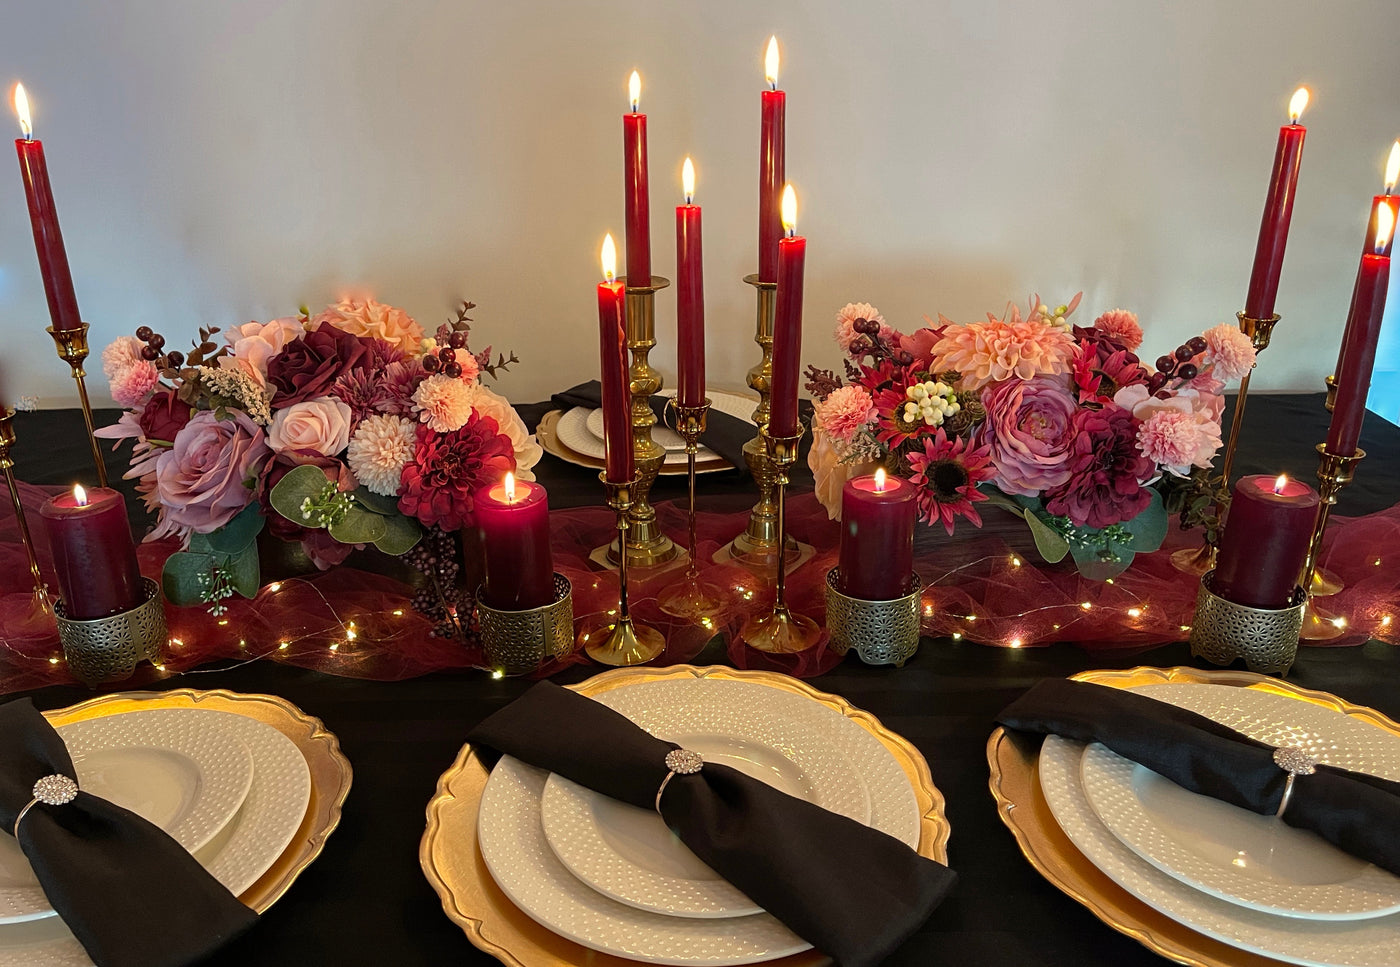 Rent a Rose- Centrepiece- Burgundy and pink flowers-  Rent for five days for $20.00.